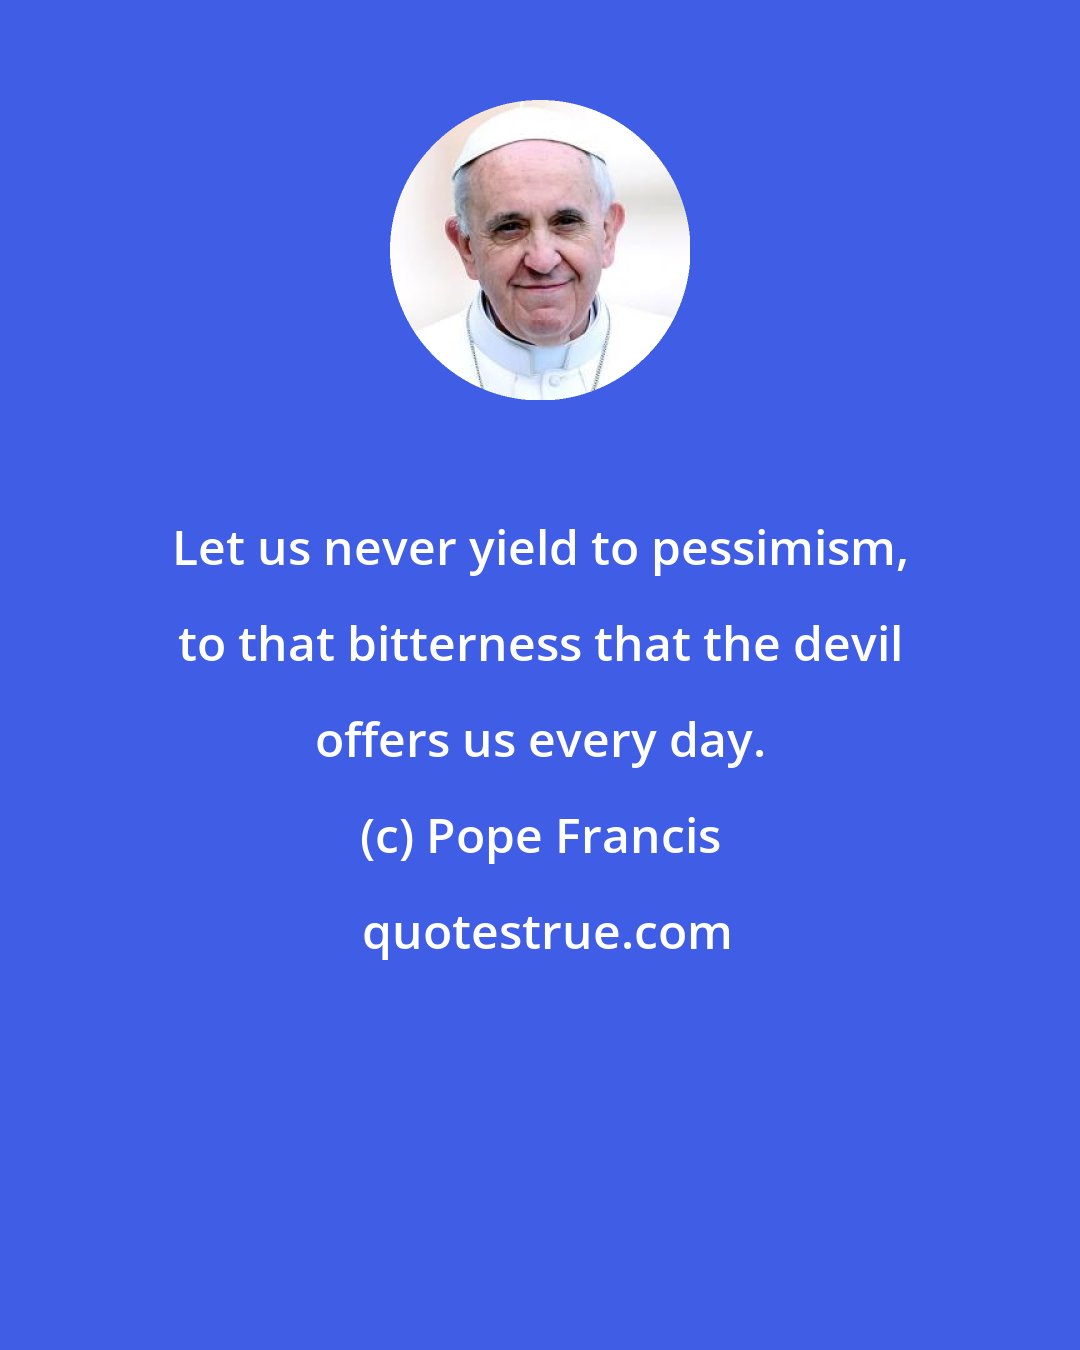 Pope Francis: Let us never yield to pessimism, to that bitterness that the devil offers us every day.